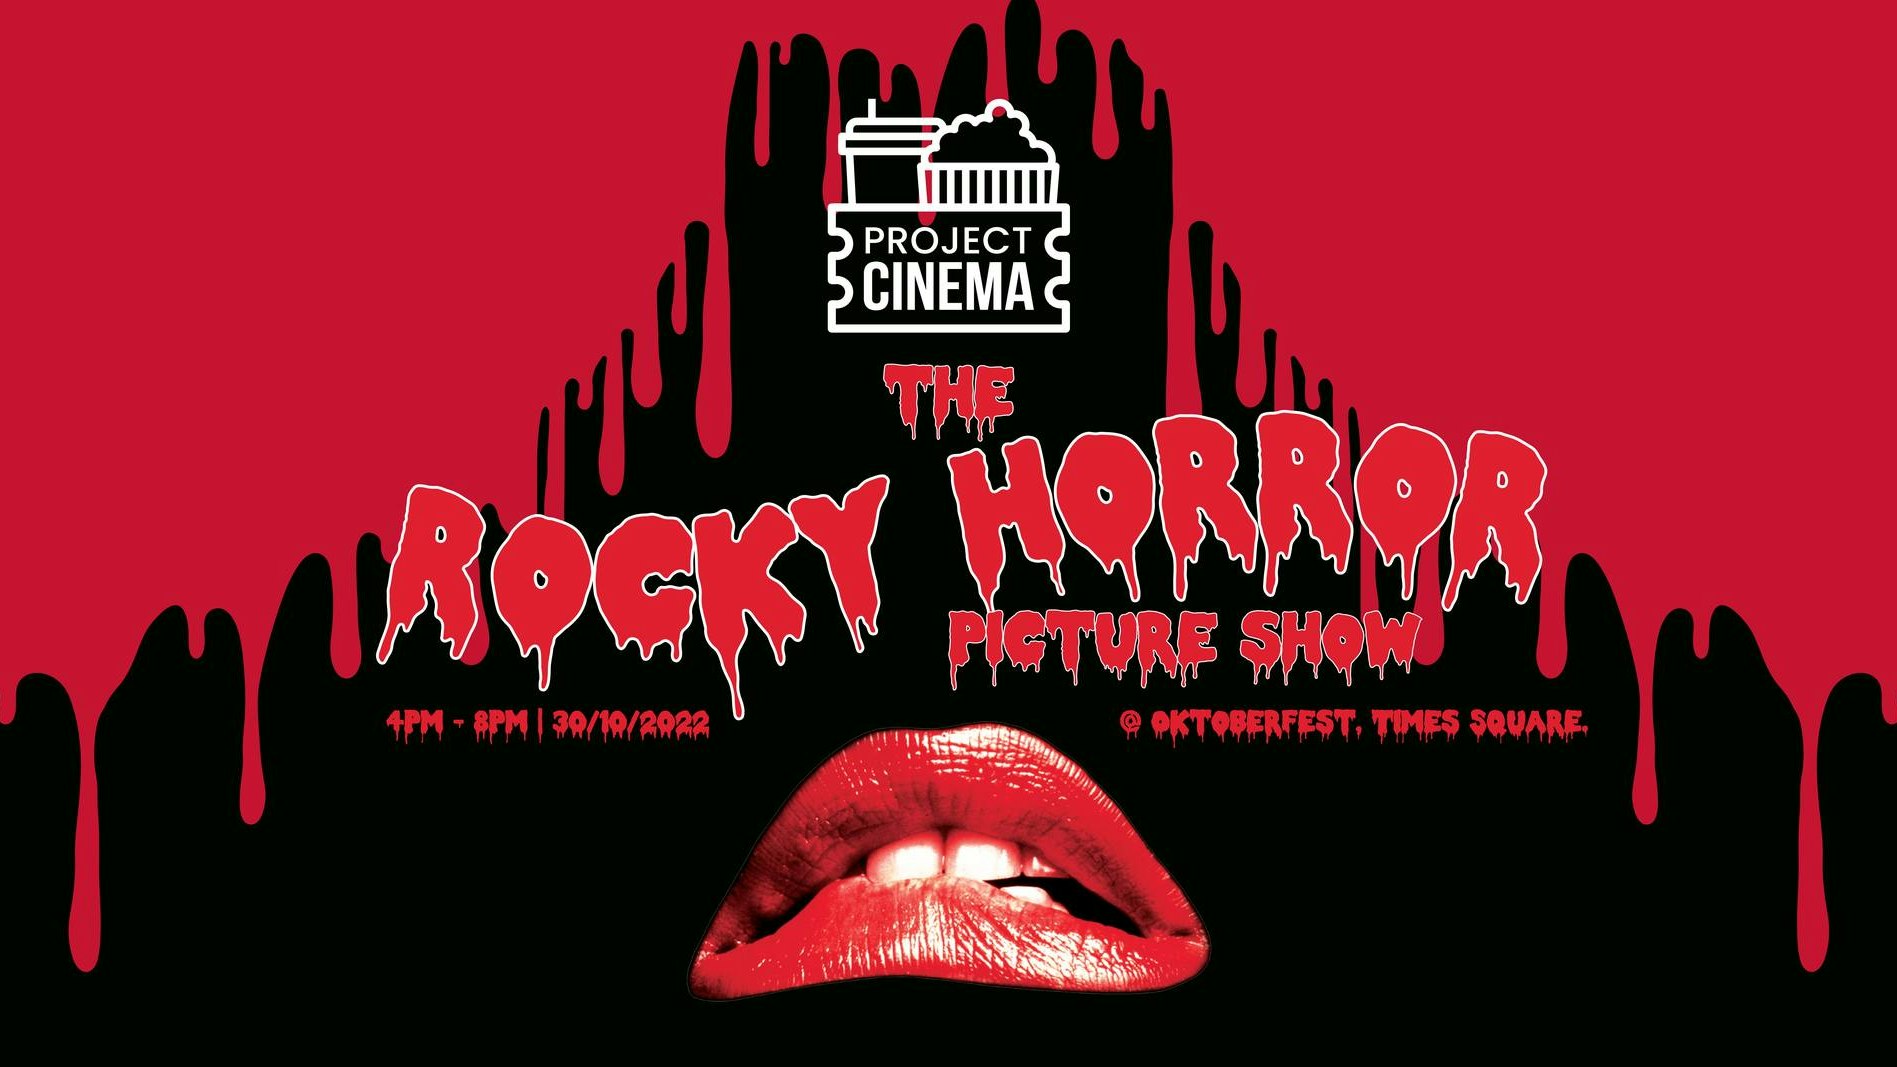 Project Cinema – The Rocky Horror Picture Show – An Interactive, Screening Experience!